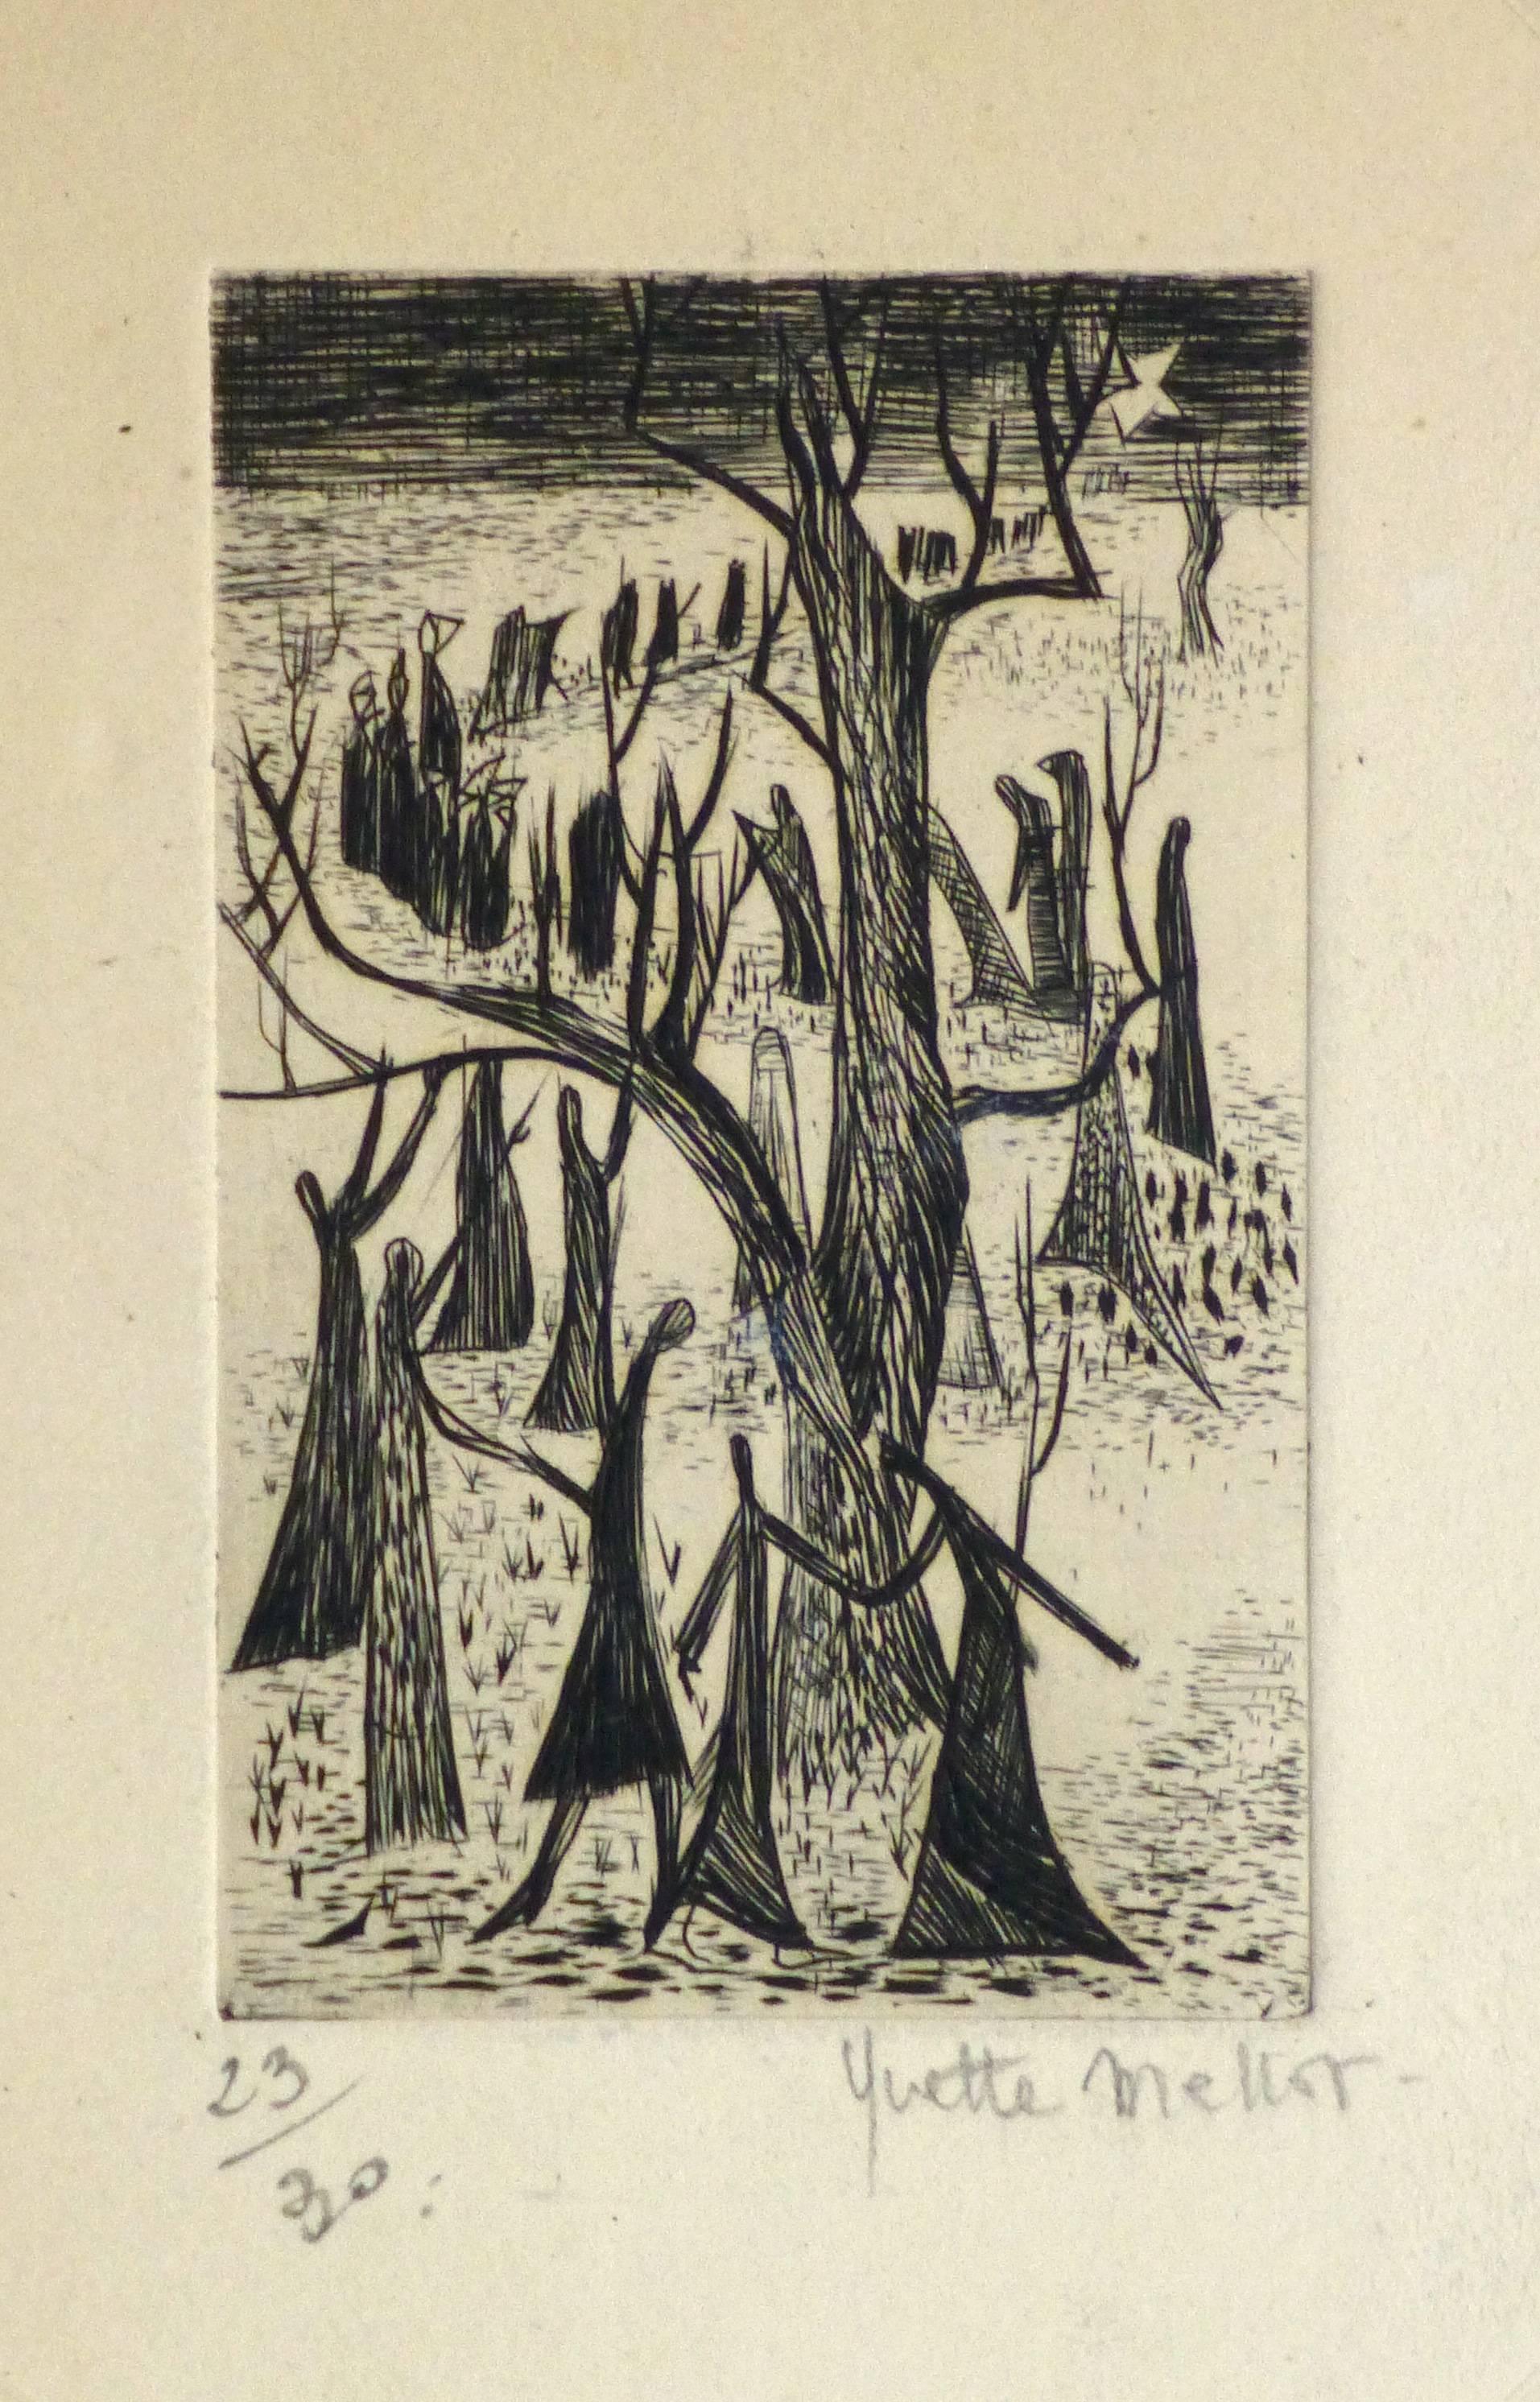 Yvette Mellot Figurative Print - French Etching - The Tree People